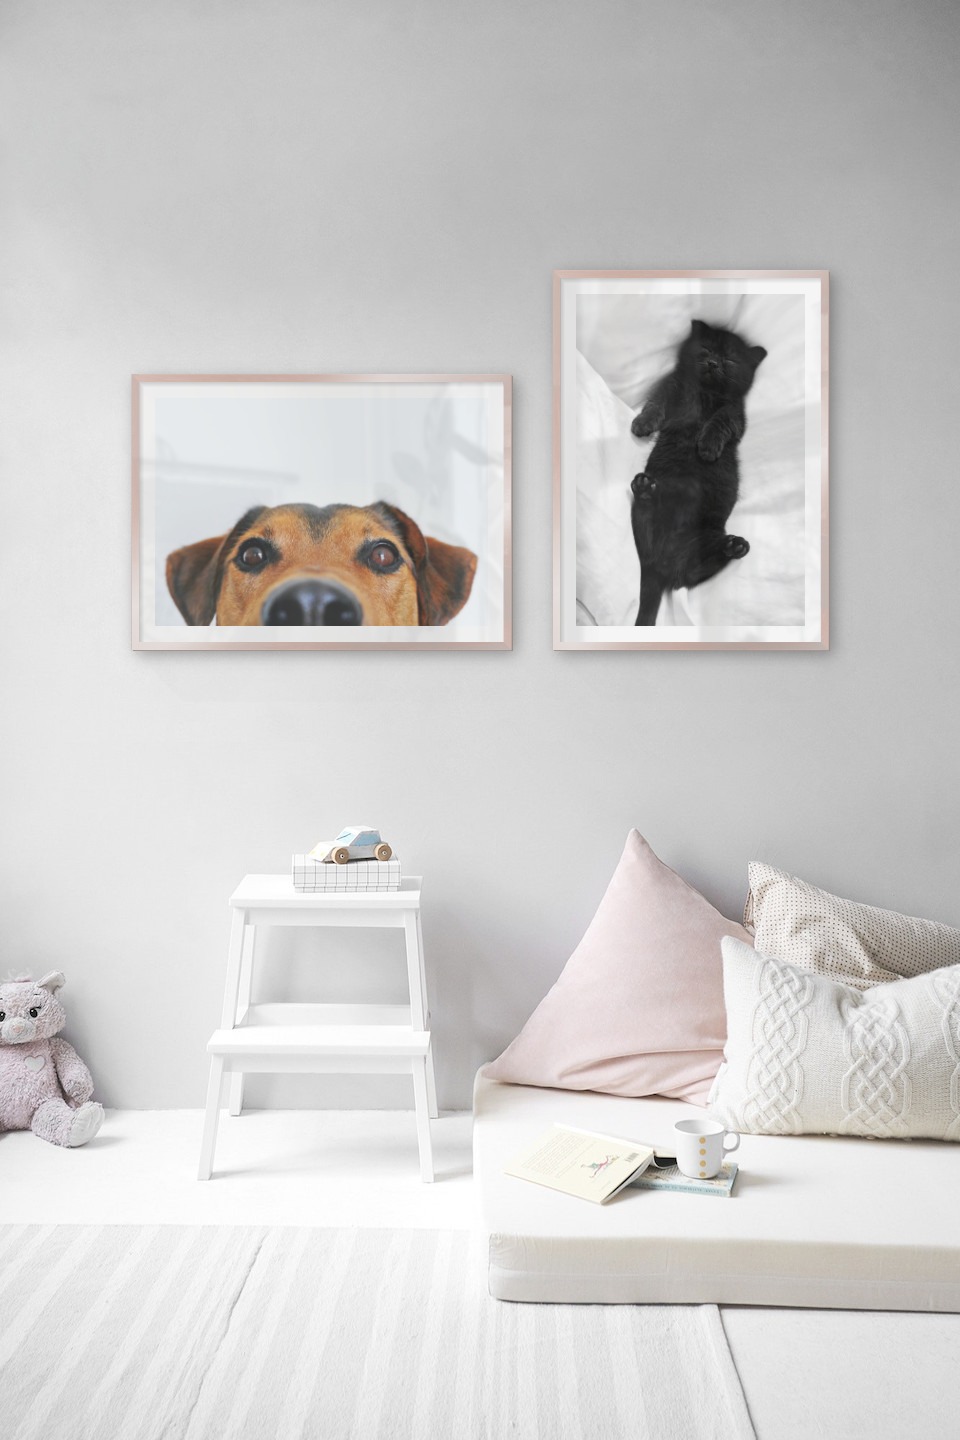 Gallery wall with picture frames in copper in sizes 50x70 with prints "Hundnos" and "Cat in bed"